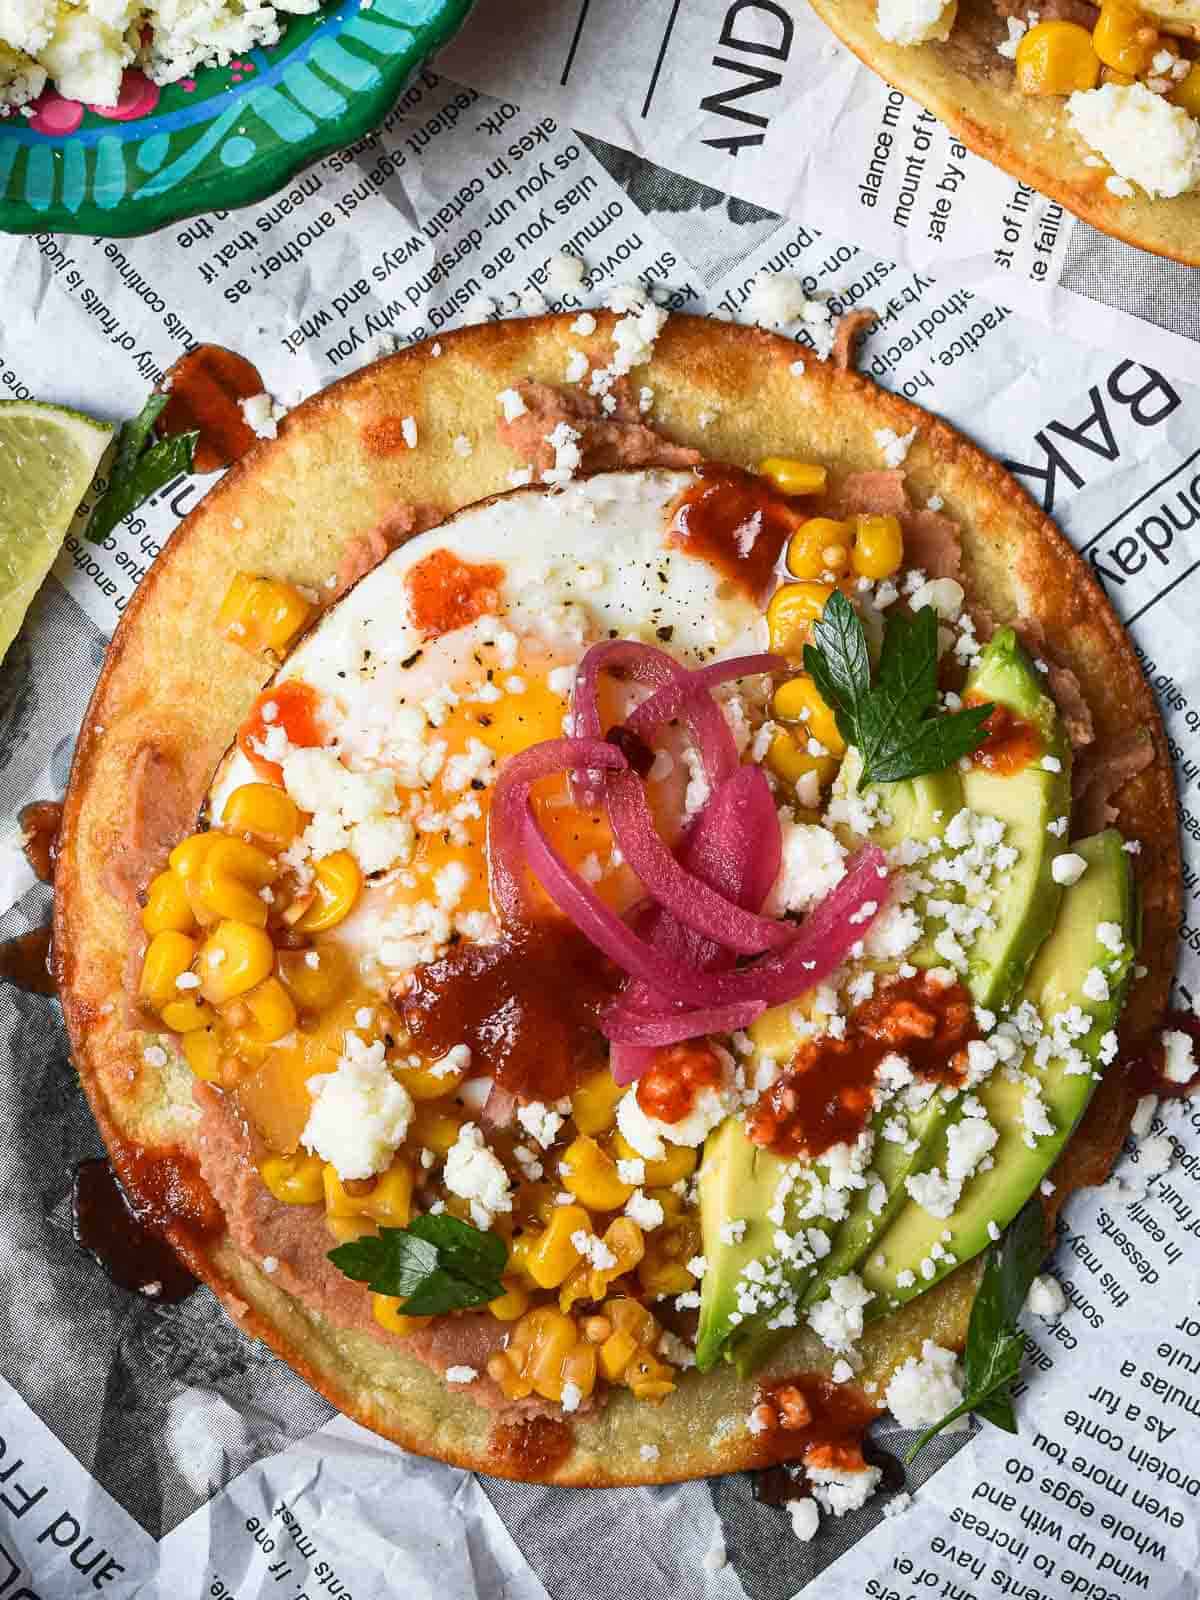 Overhead view of a Mexican tostada with toppings on newspaper.